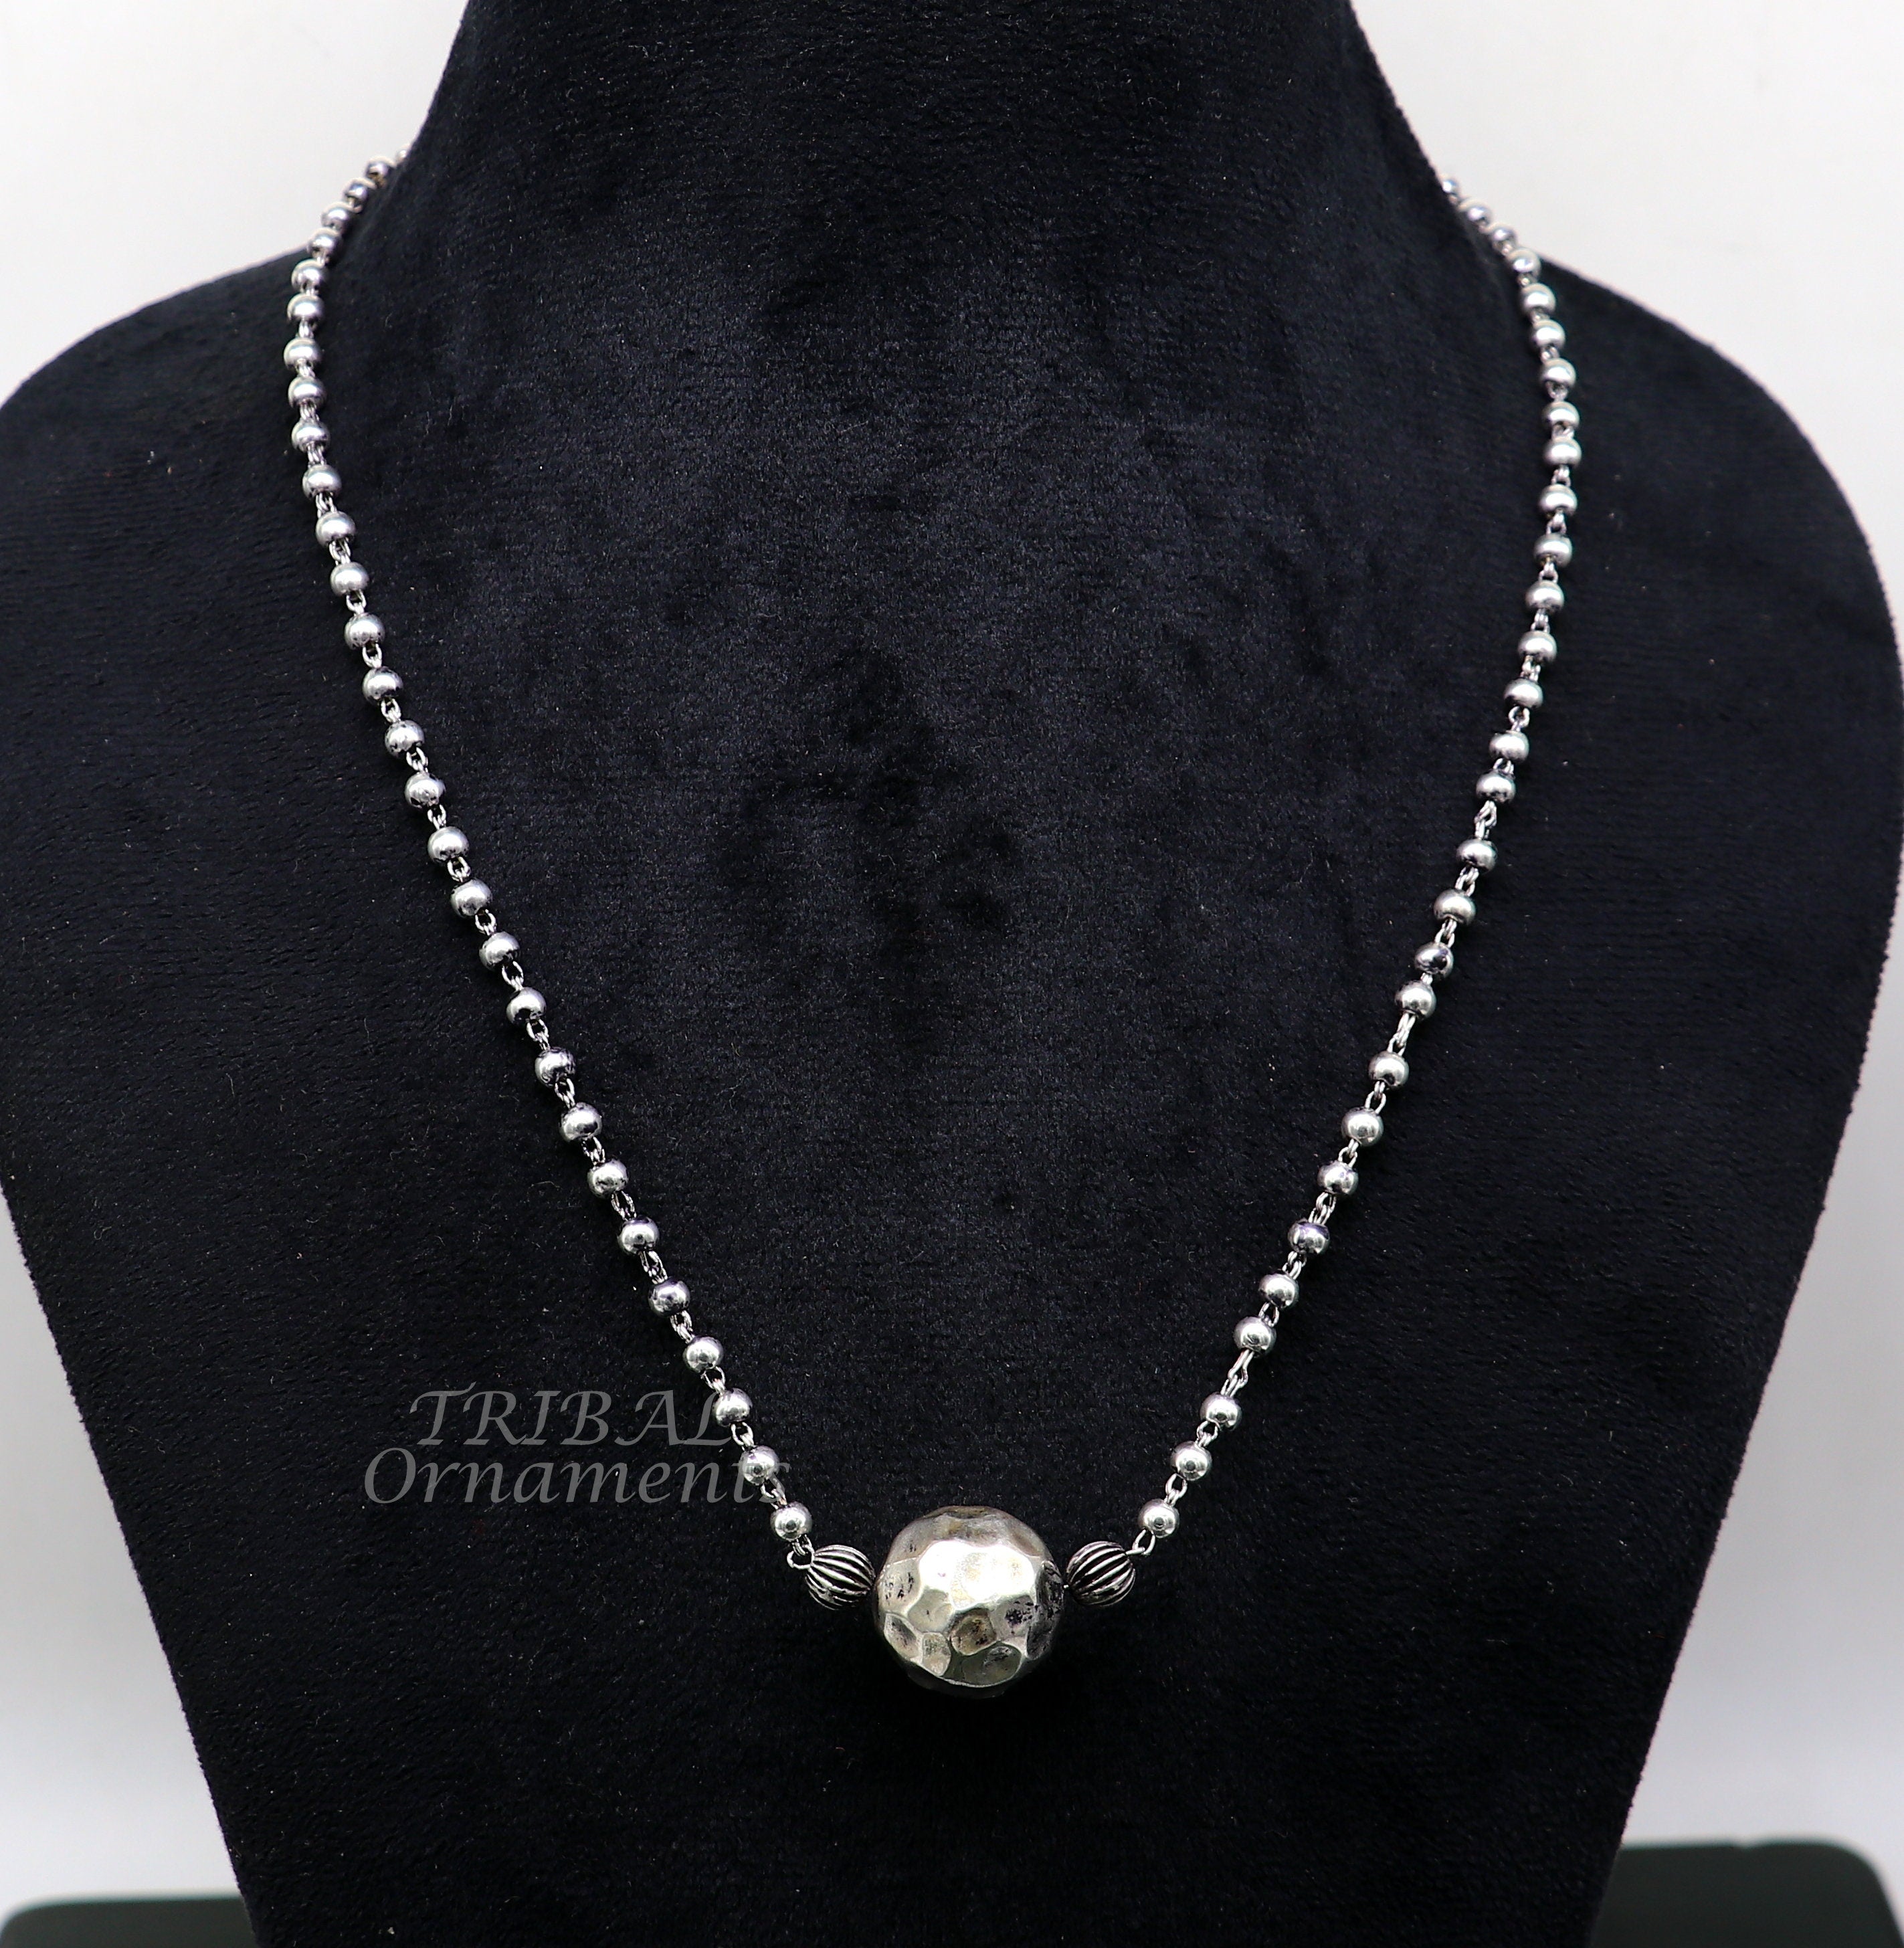 4mm Sterling Silver Bead Ball Chain Bracelet or Necklace – Kathy Bankston